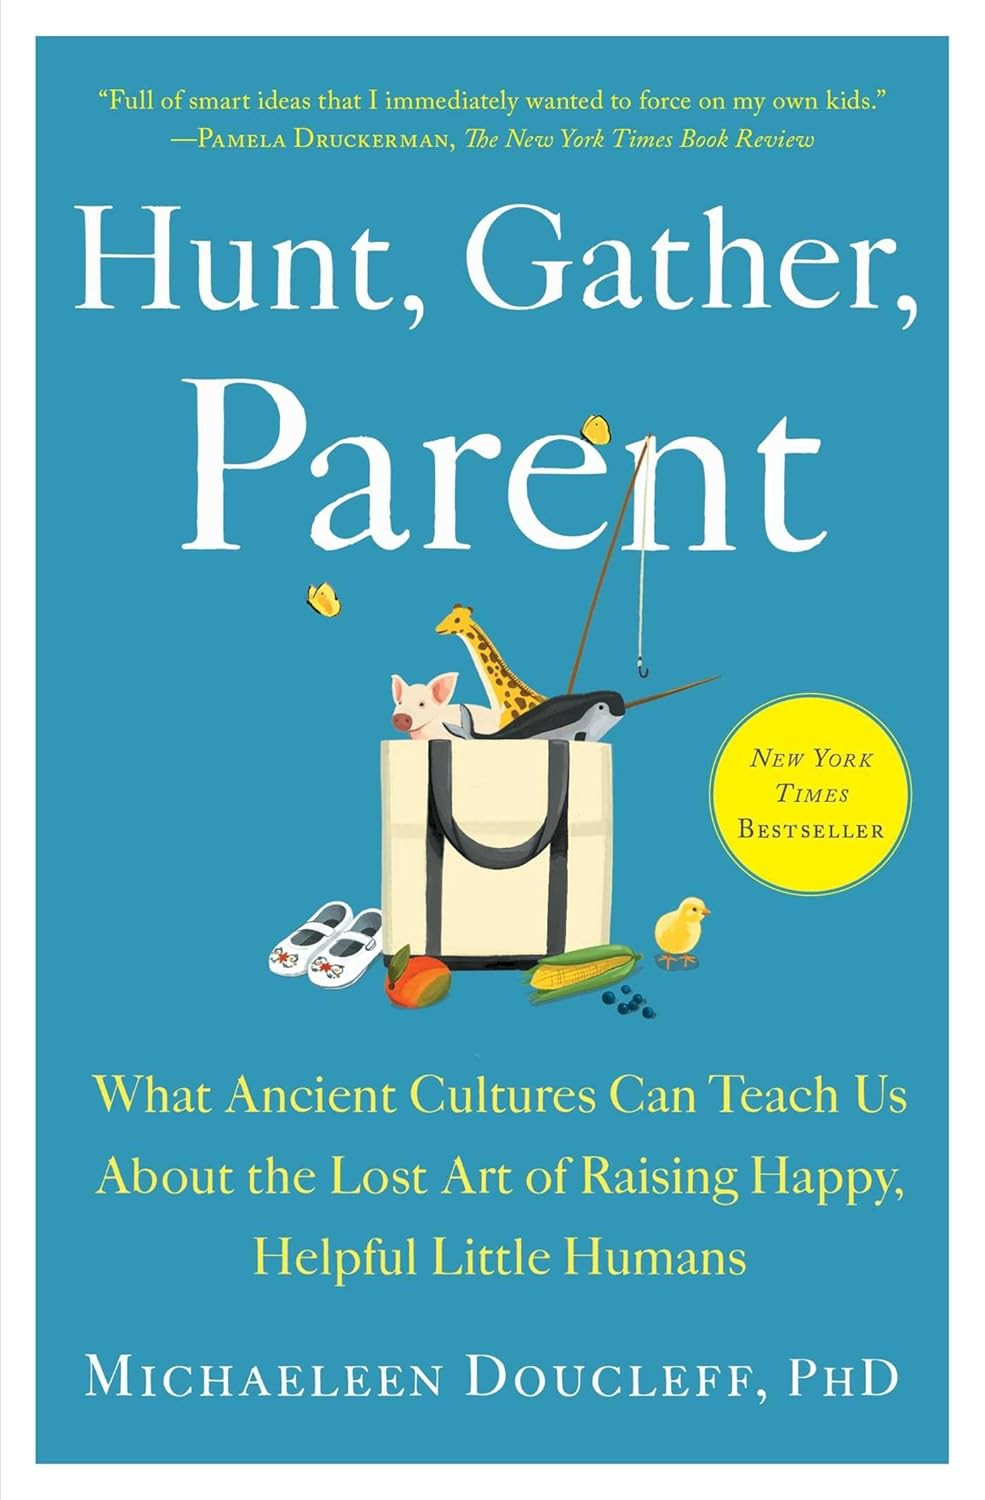 Hunt, Gather, Parent Book Review: A Christian Mom's Perspective